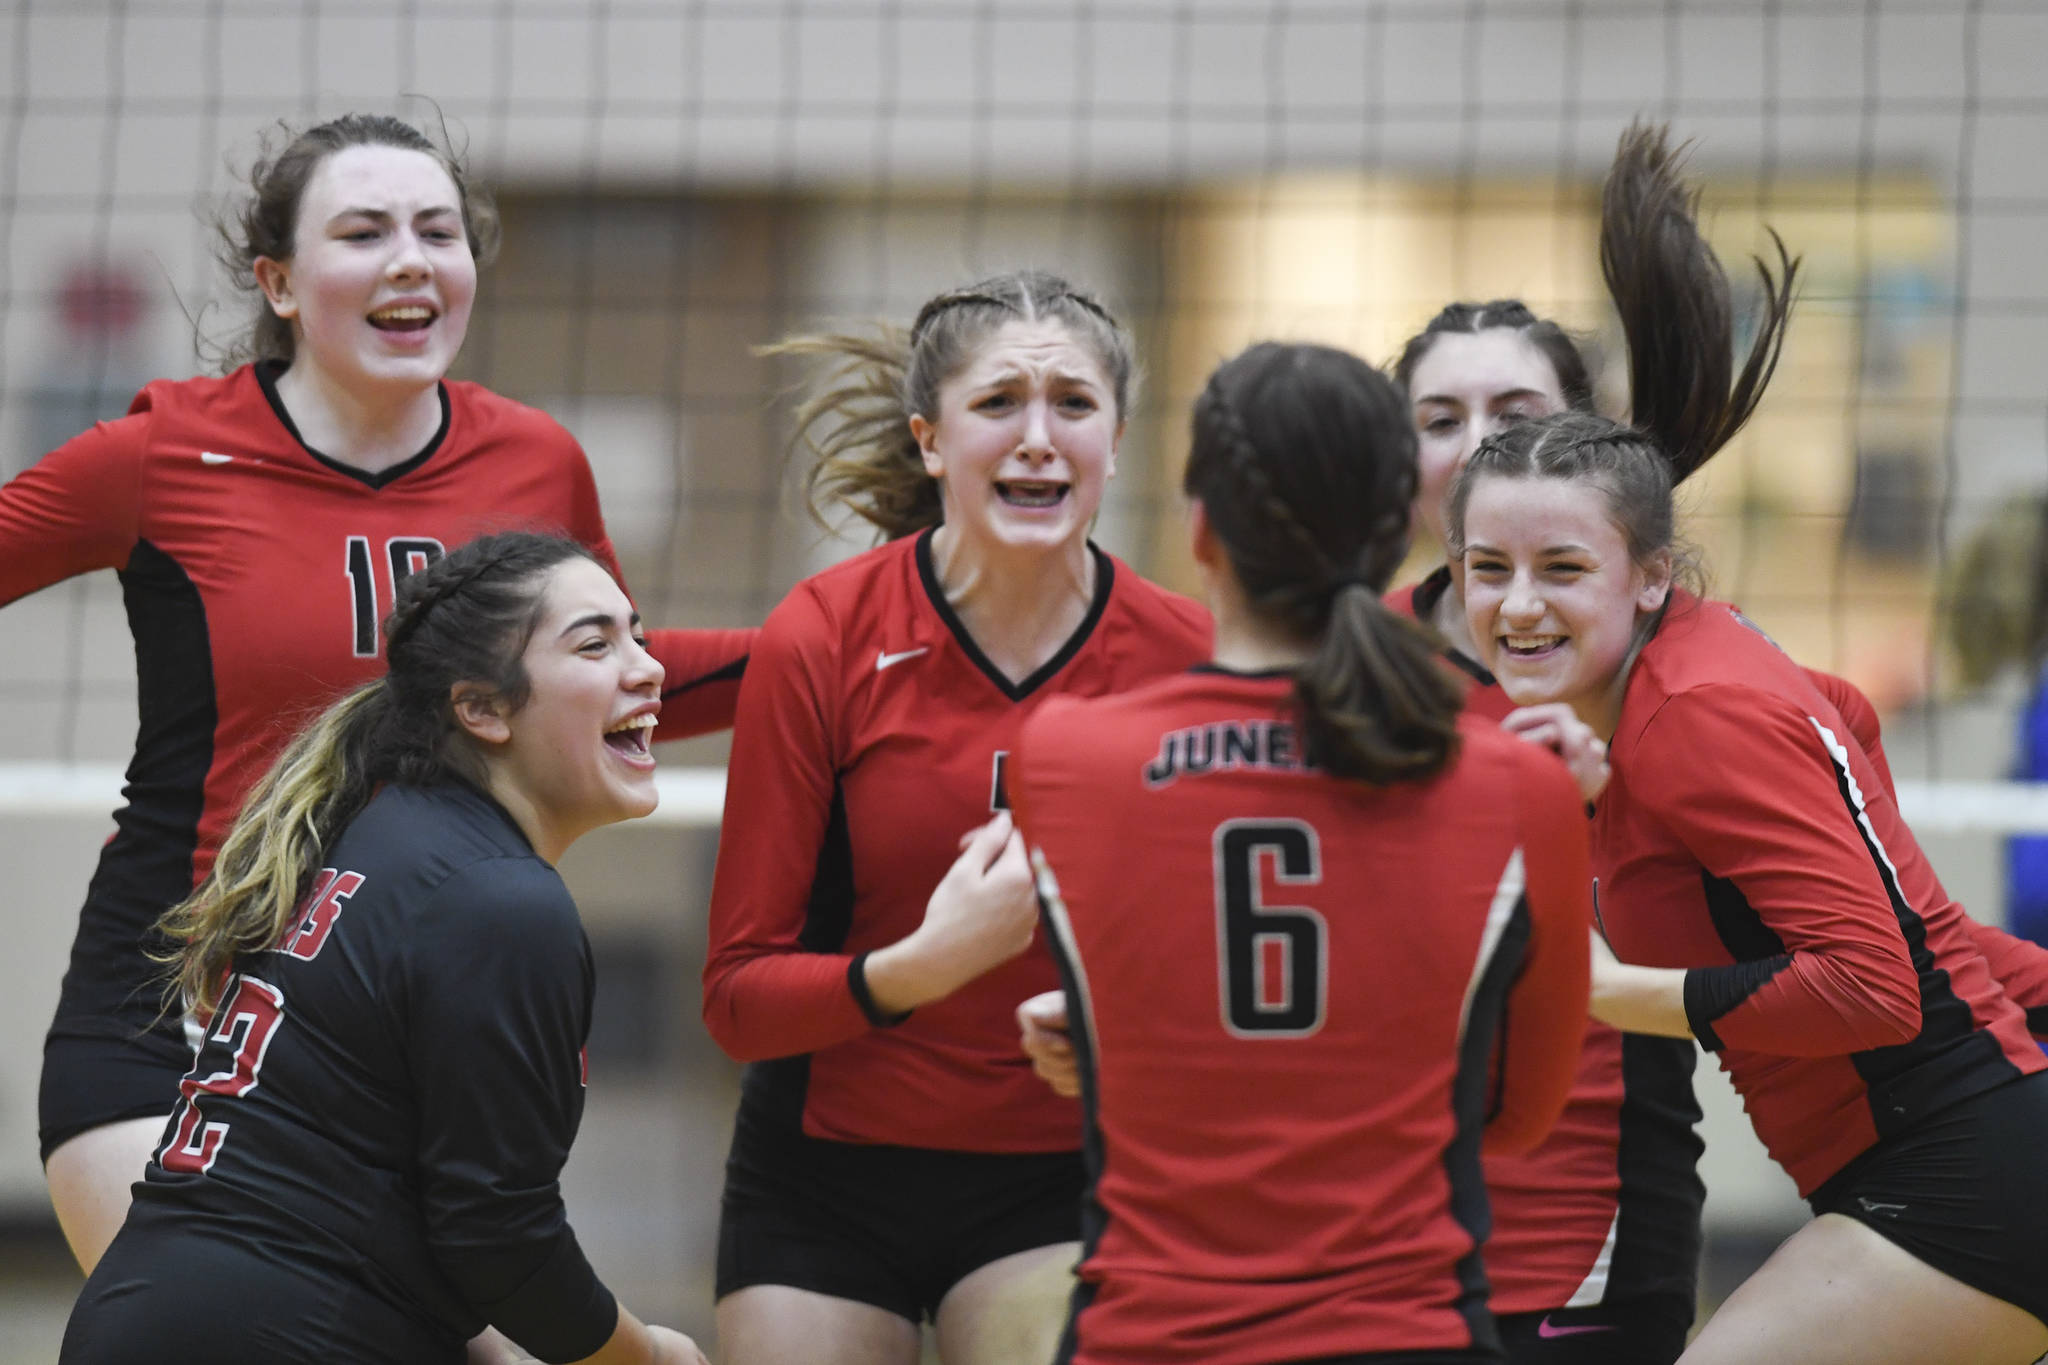 Juneau-Douglas’ Addie Prussing (6) is cheered by her teammates after a point against Thunder Mountain at Juneau-Douglas High School: Yadaa.at Kalé on Friday, Nov. 1, 2019. Thunder Mountain won 3-0 (25-14, 25-20, 25-20). (Michael Penn | Juneau Empire)